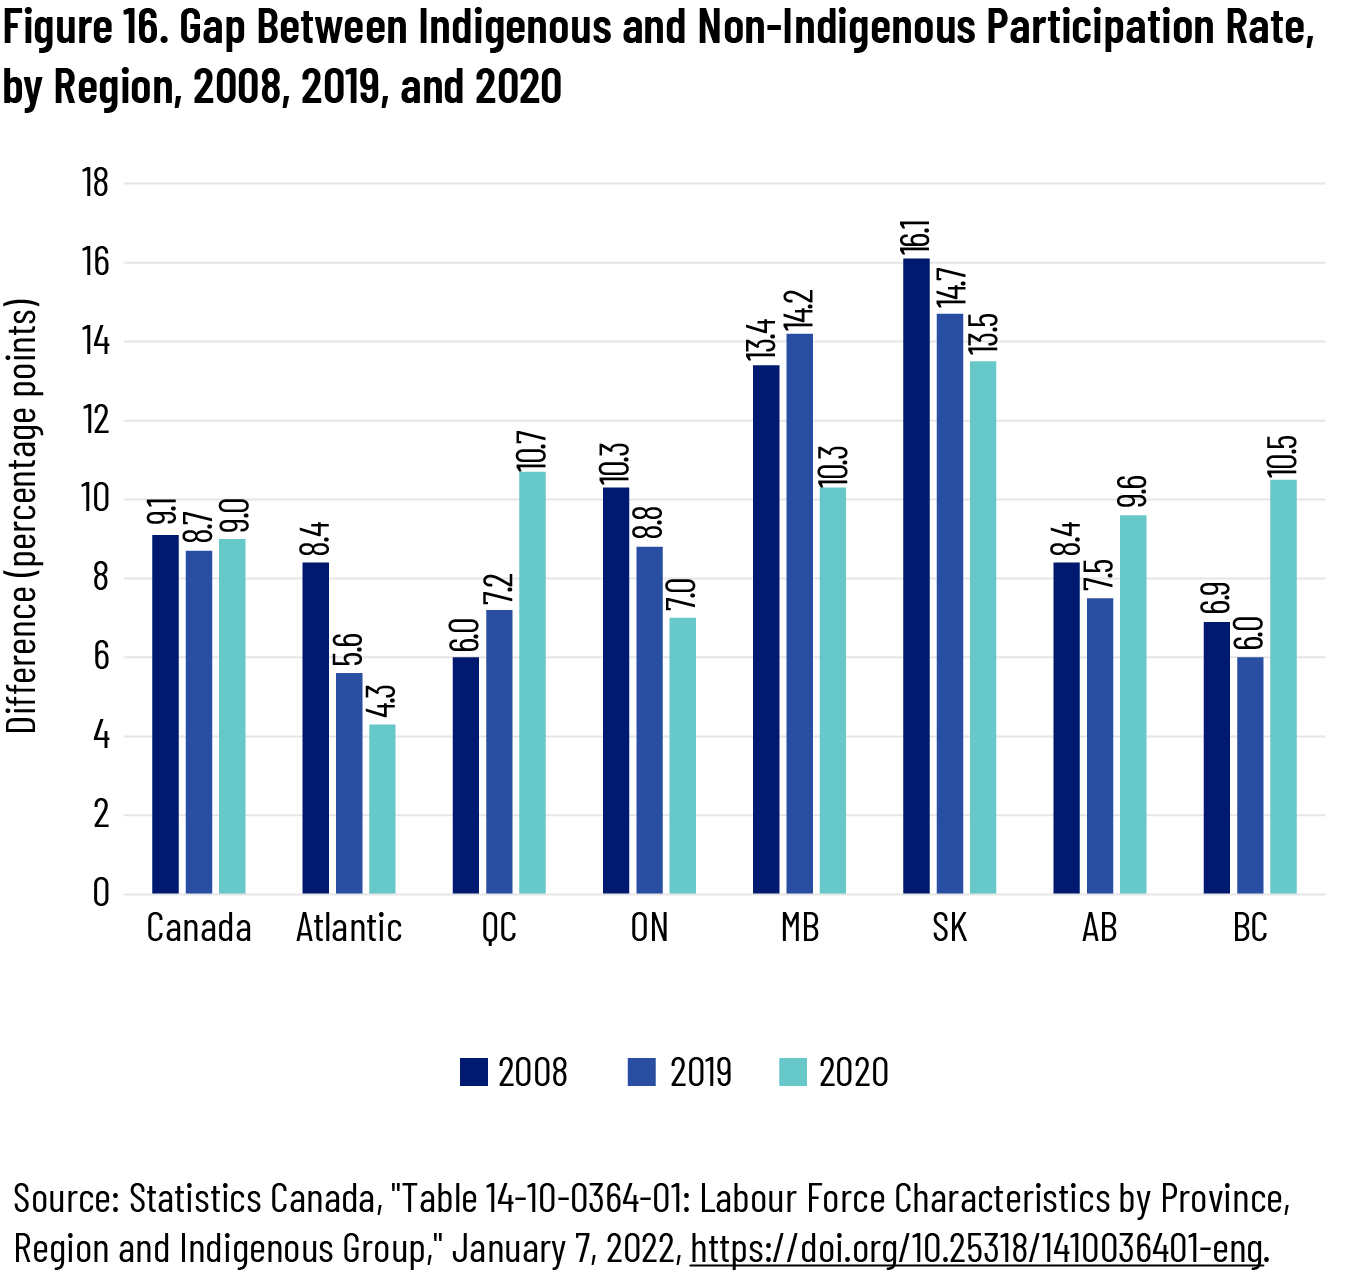 Figure 16. Gap Between Indigenous and Non-Indigenous Participation Rate, by Region, 2008, 2019, and 2020